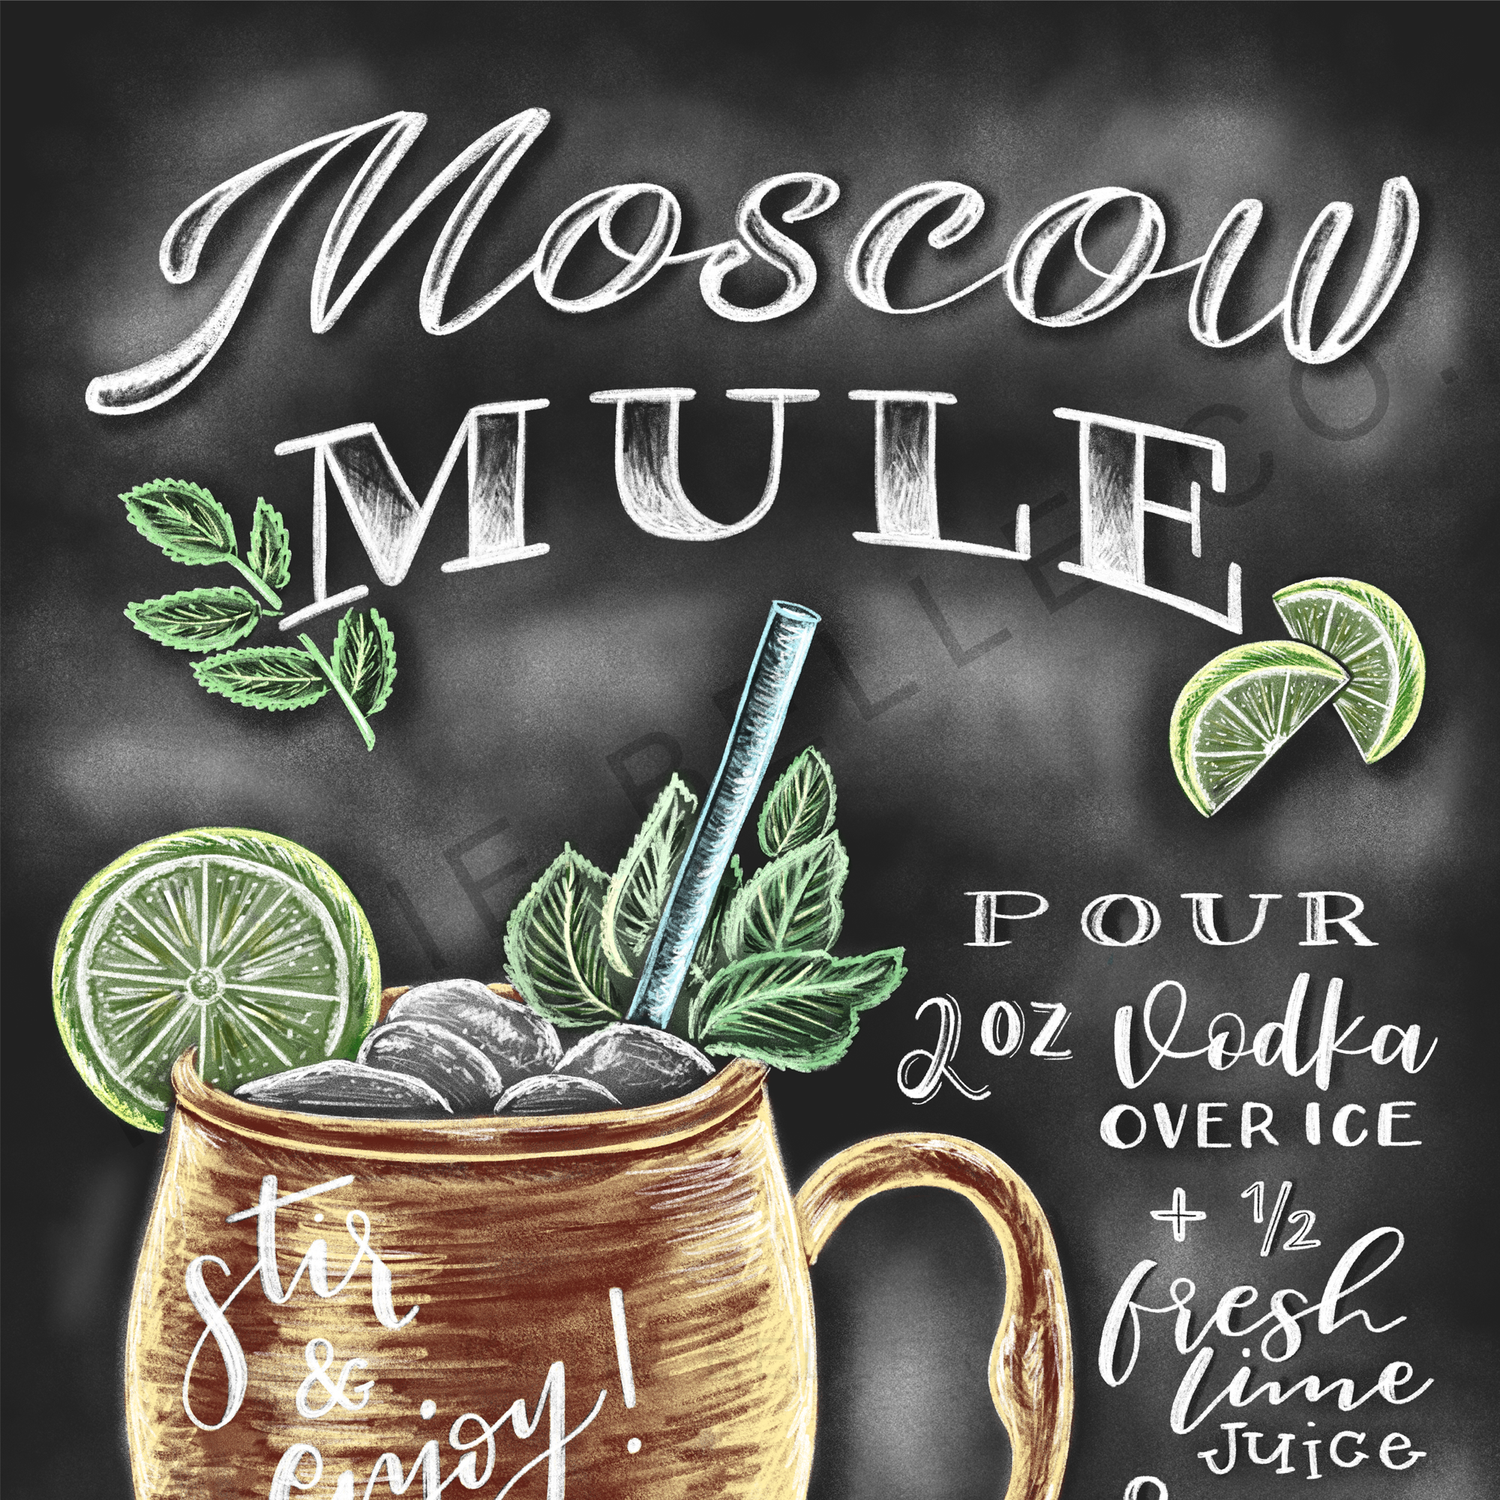 Moscow Mule. Moscow Mule Recipe. Chalk Art. Chalkboard Print. Stir and enjoy. limes. mint leaves. copper mug. ginger beer. 8 x 10 print. 5 x 7 print. unframed art. Heavy matte paper. Vibrant colors. 